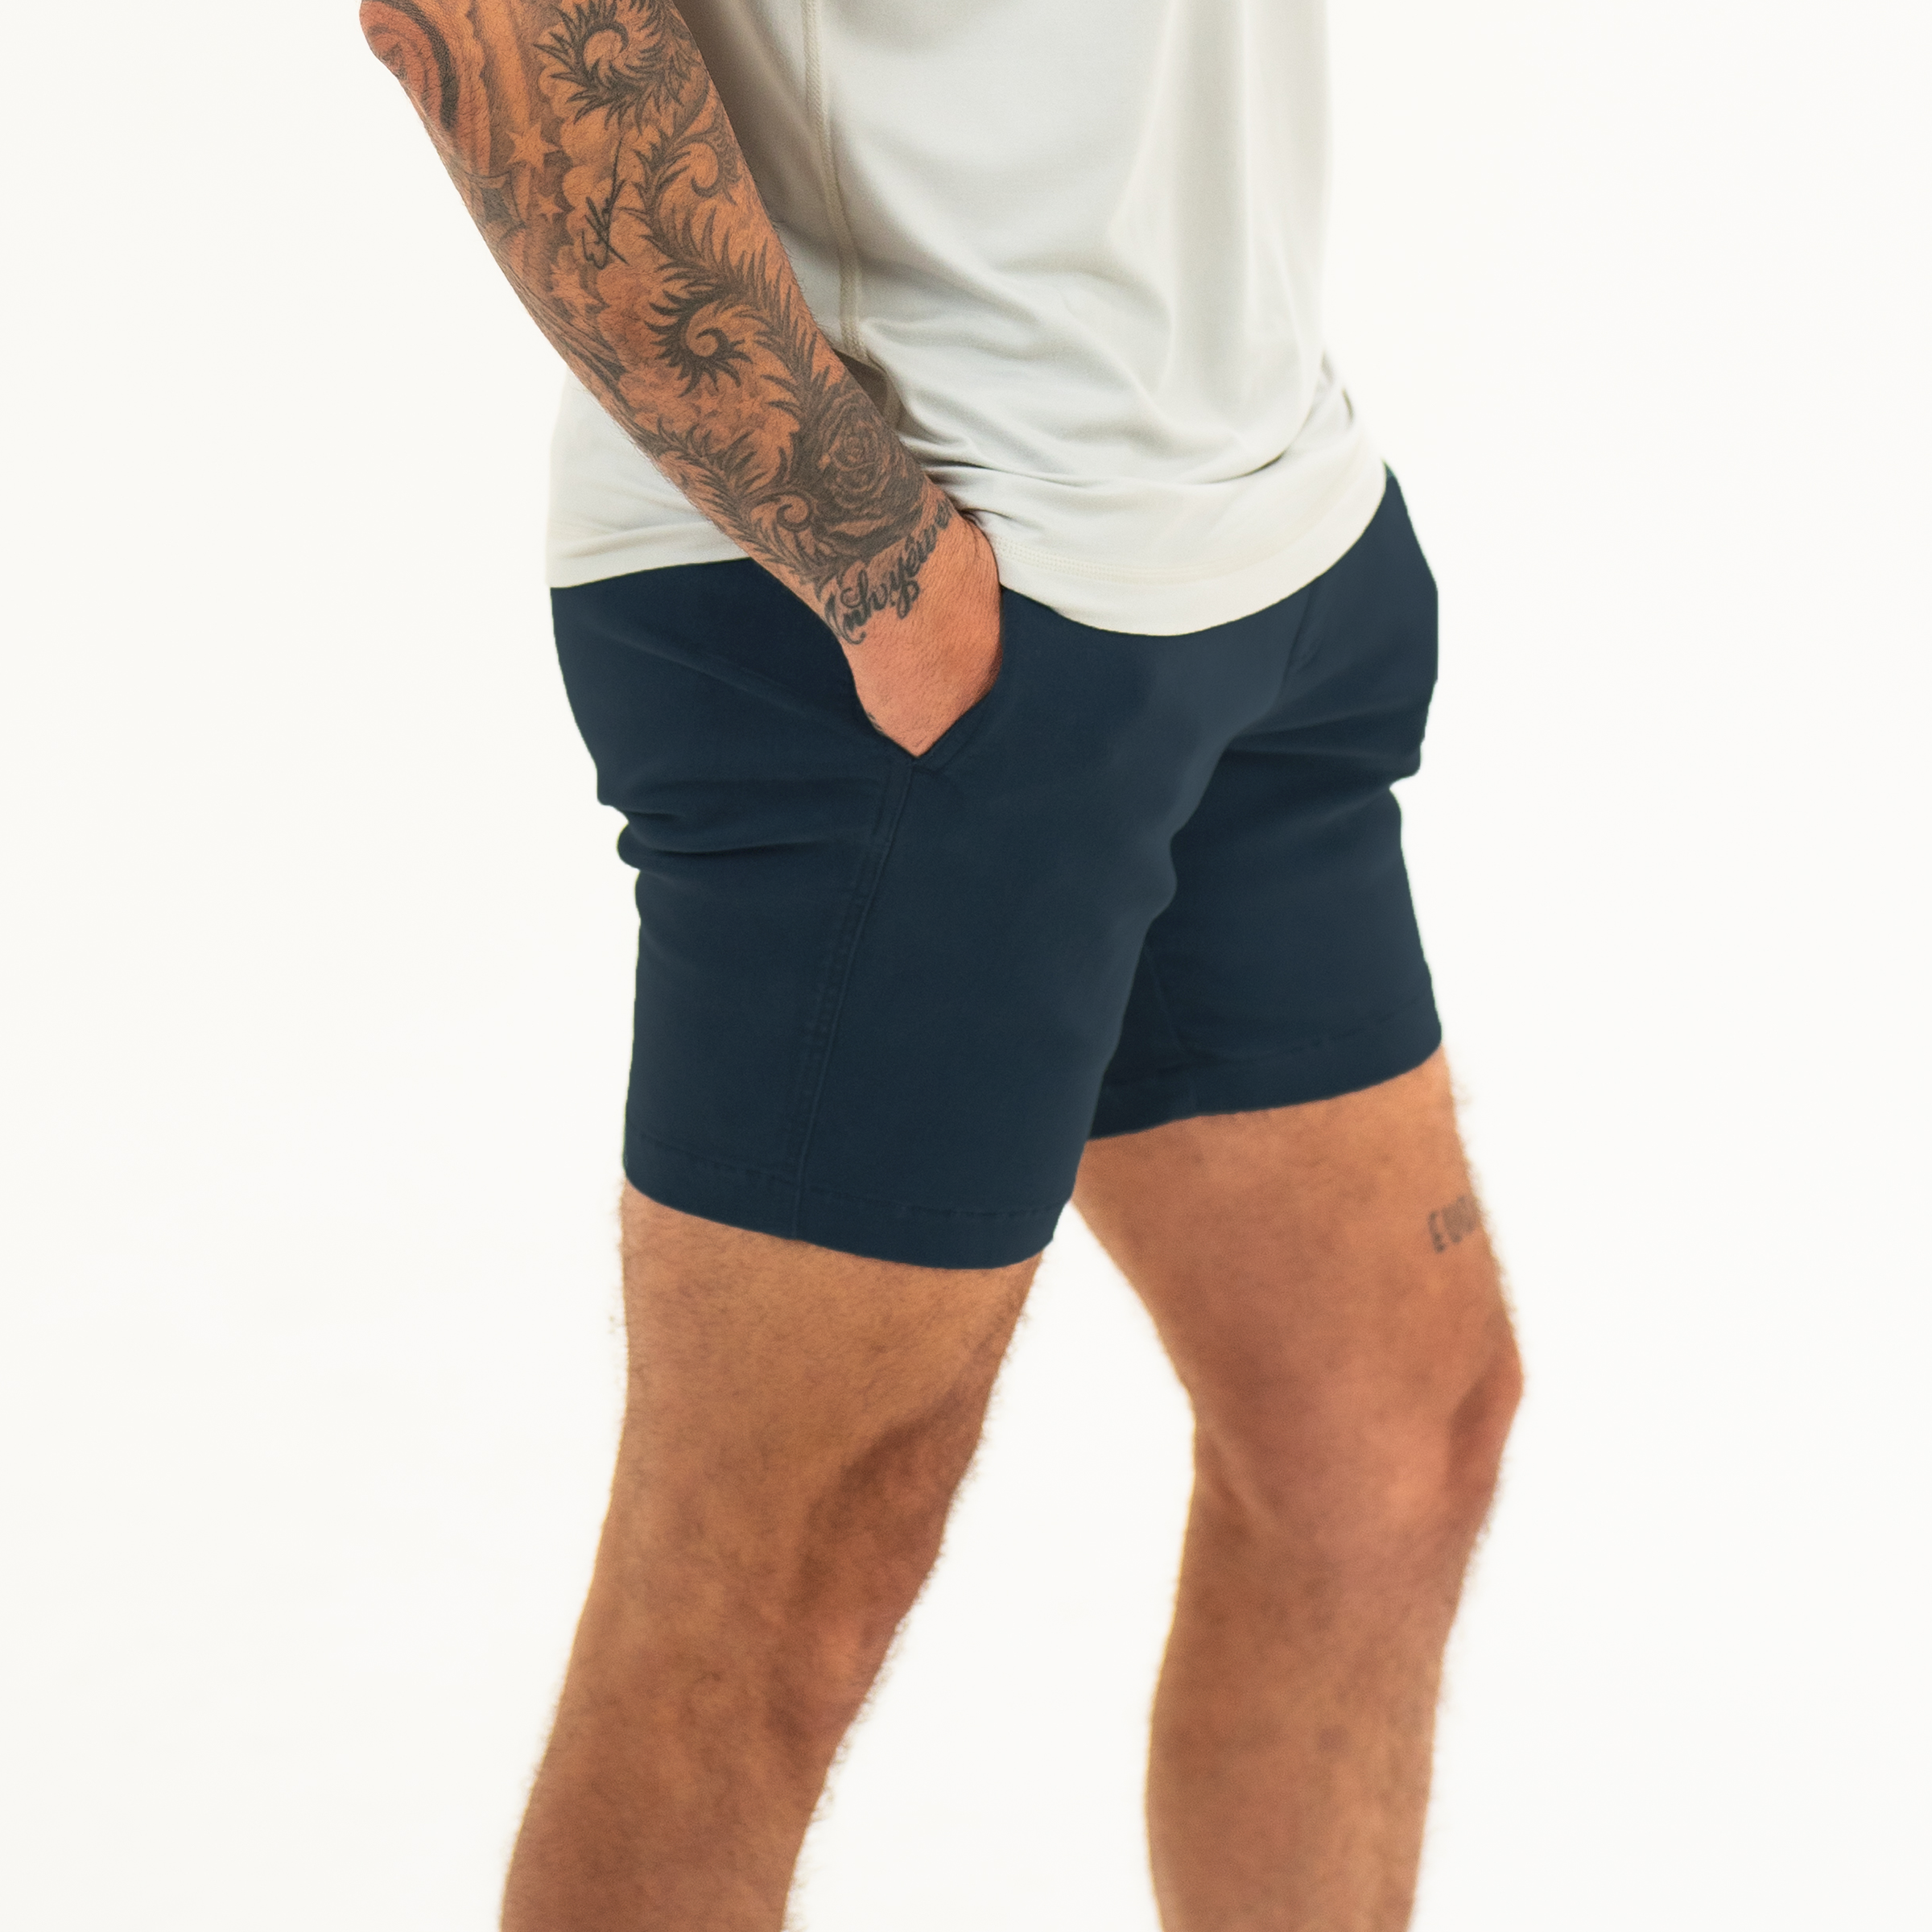 Alto Short 7" inseam in Navy side on model with elastic waistband, fabric drawstring, faux fly, and two front side seam pockets